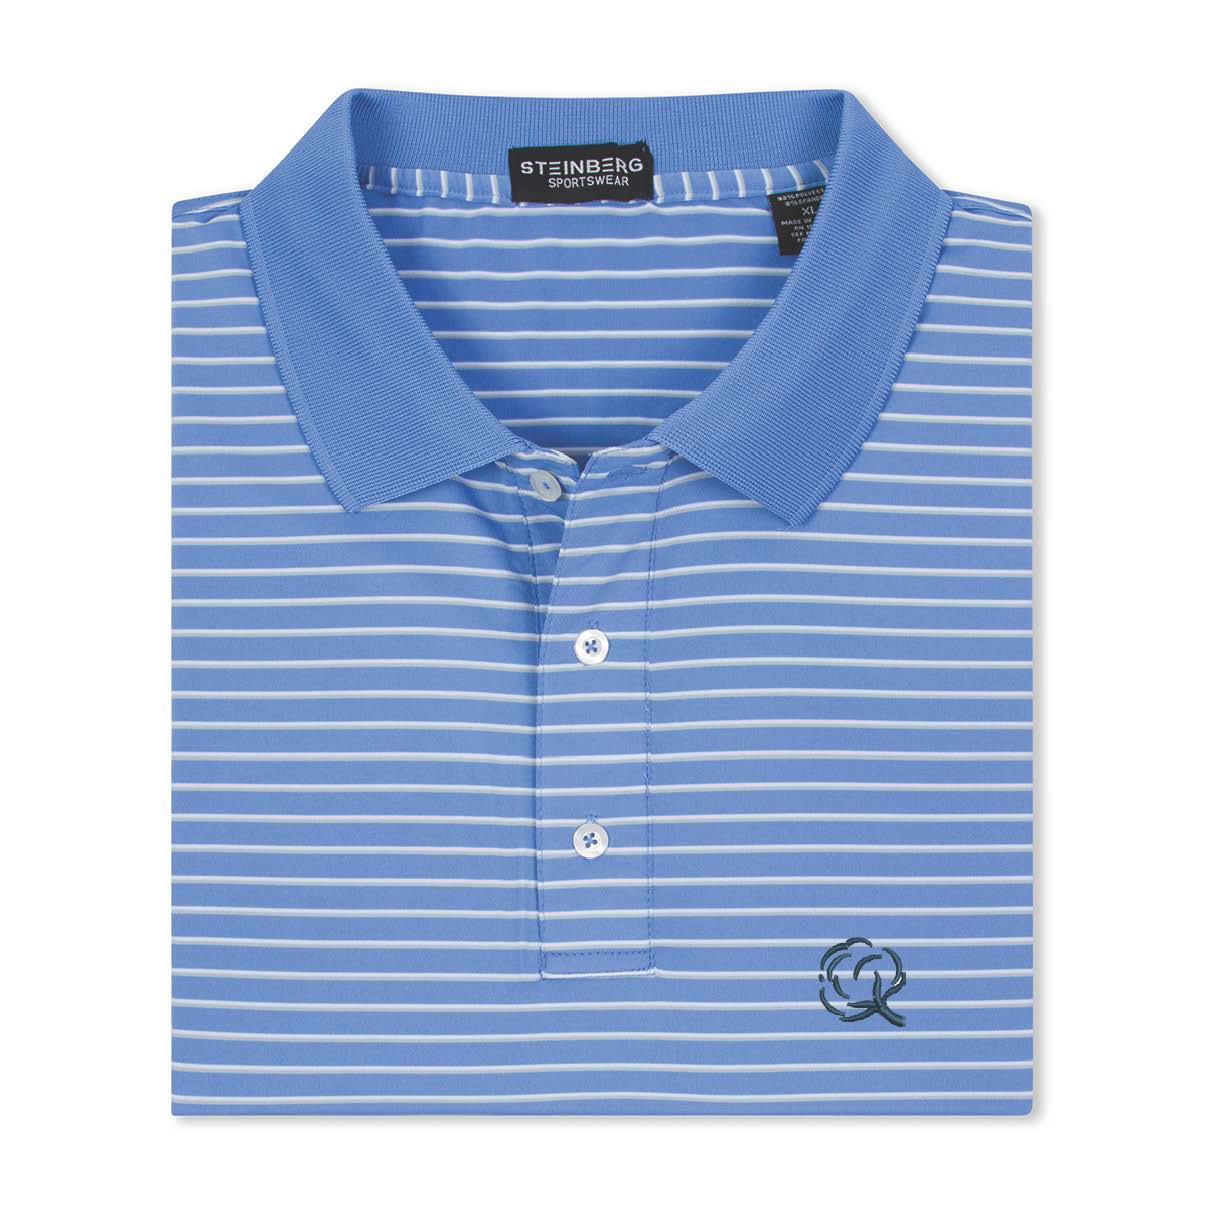 The Dawn Patrol Performance Polo Cotton Collection